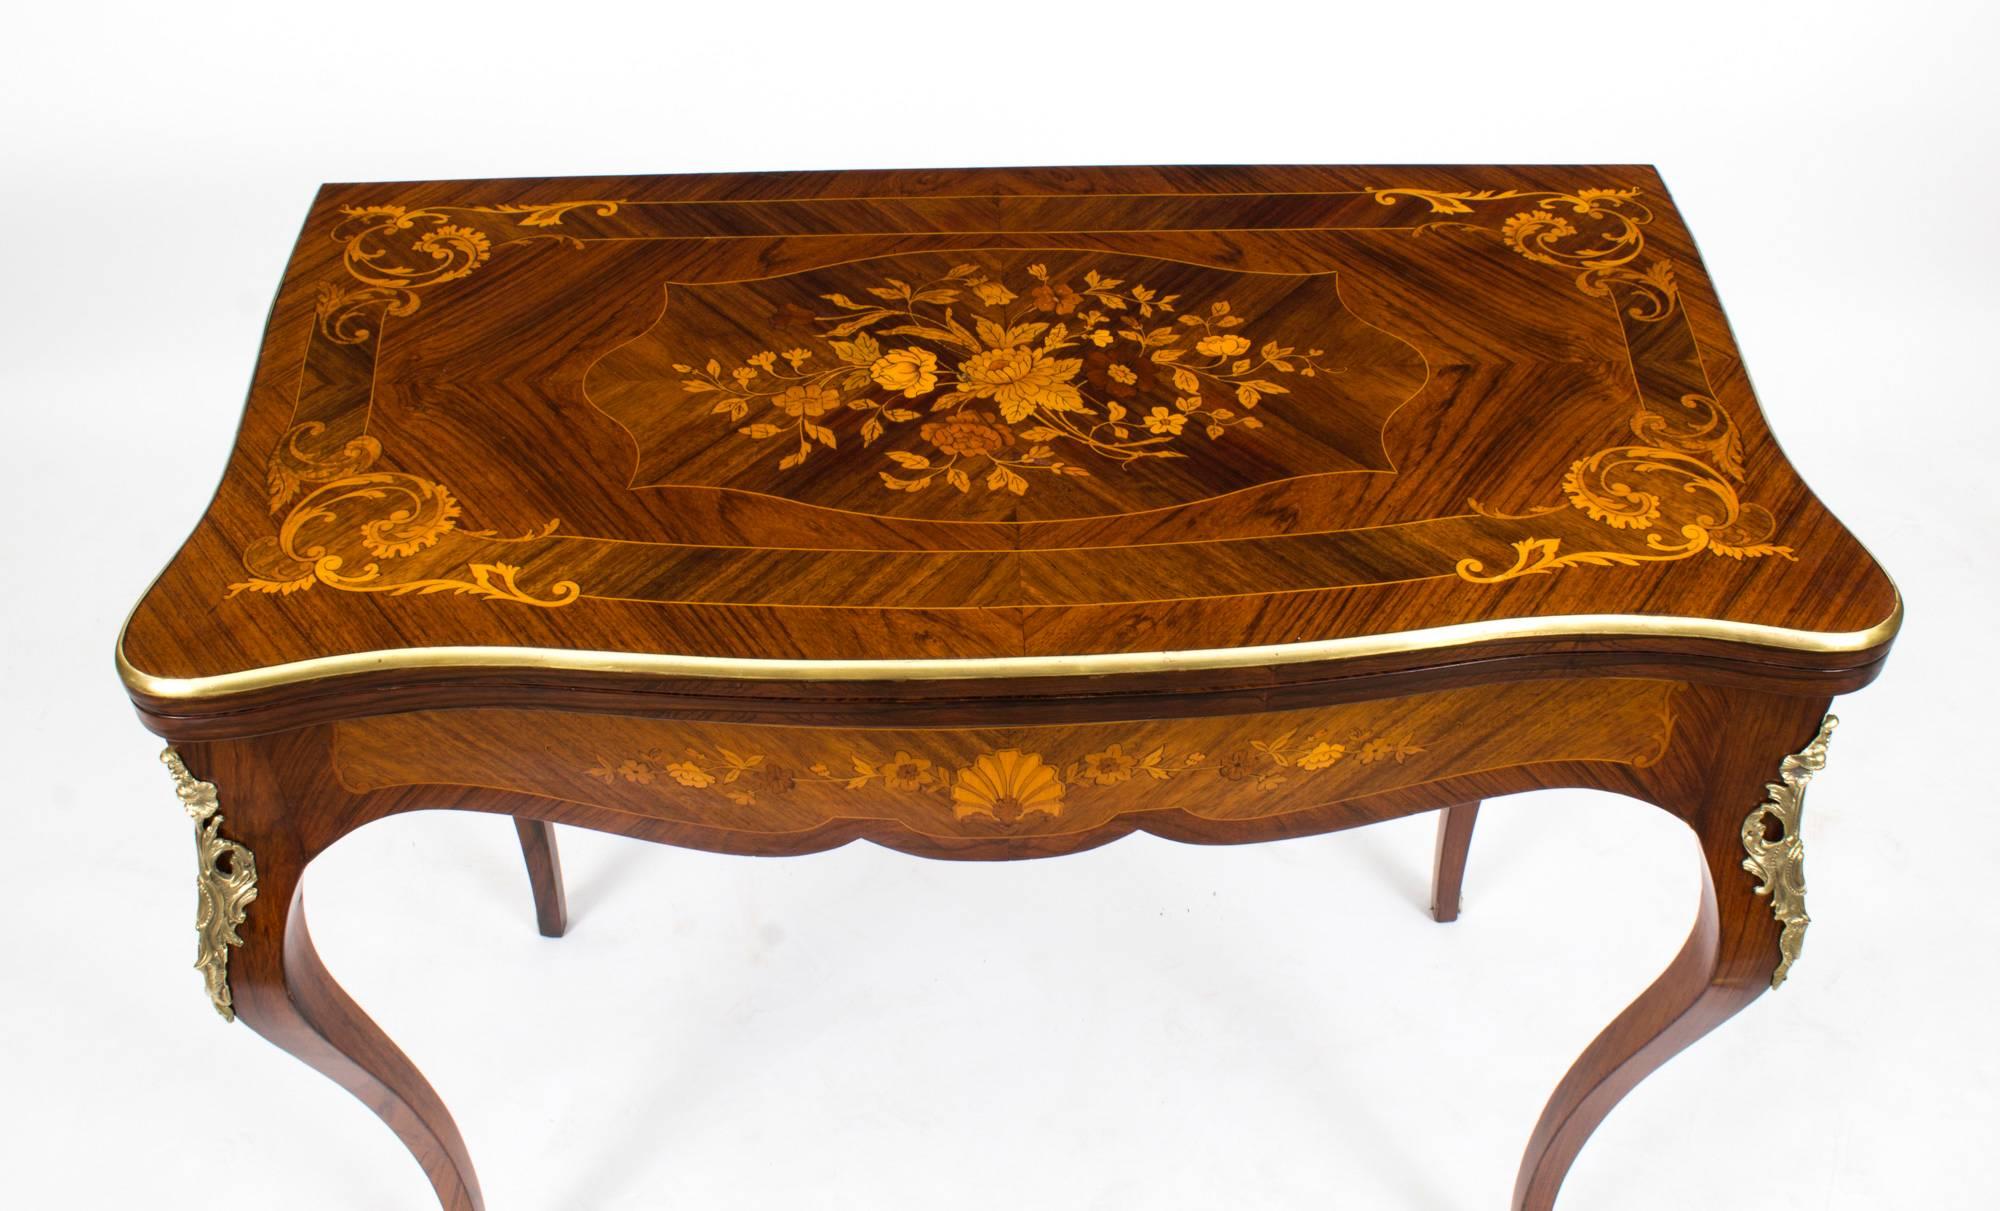 This is a stunning late 19th century antique French burr walnut and floral marquetry card table with ormolu mounts, circa 1880 in date.
 
The shaped burr walnut top has line inlay encompassing exquisite floral marquetry, and a stunning gilt bronze